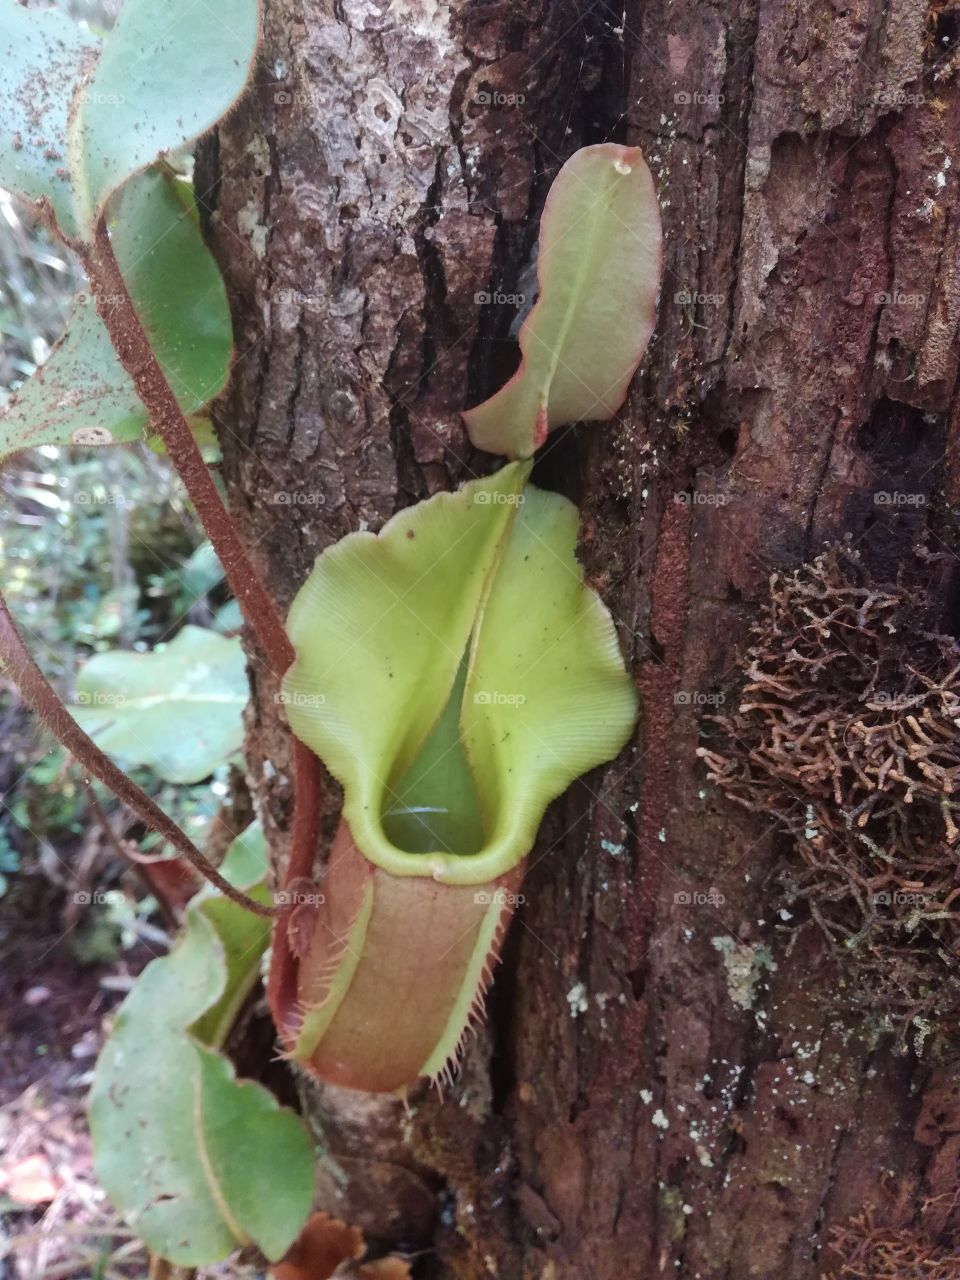 pitcher plant - Nepenthes veitchii